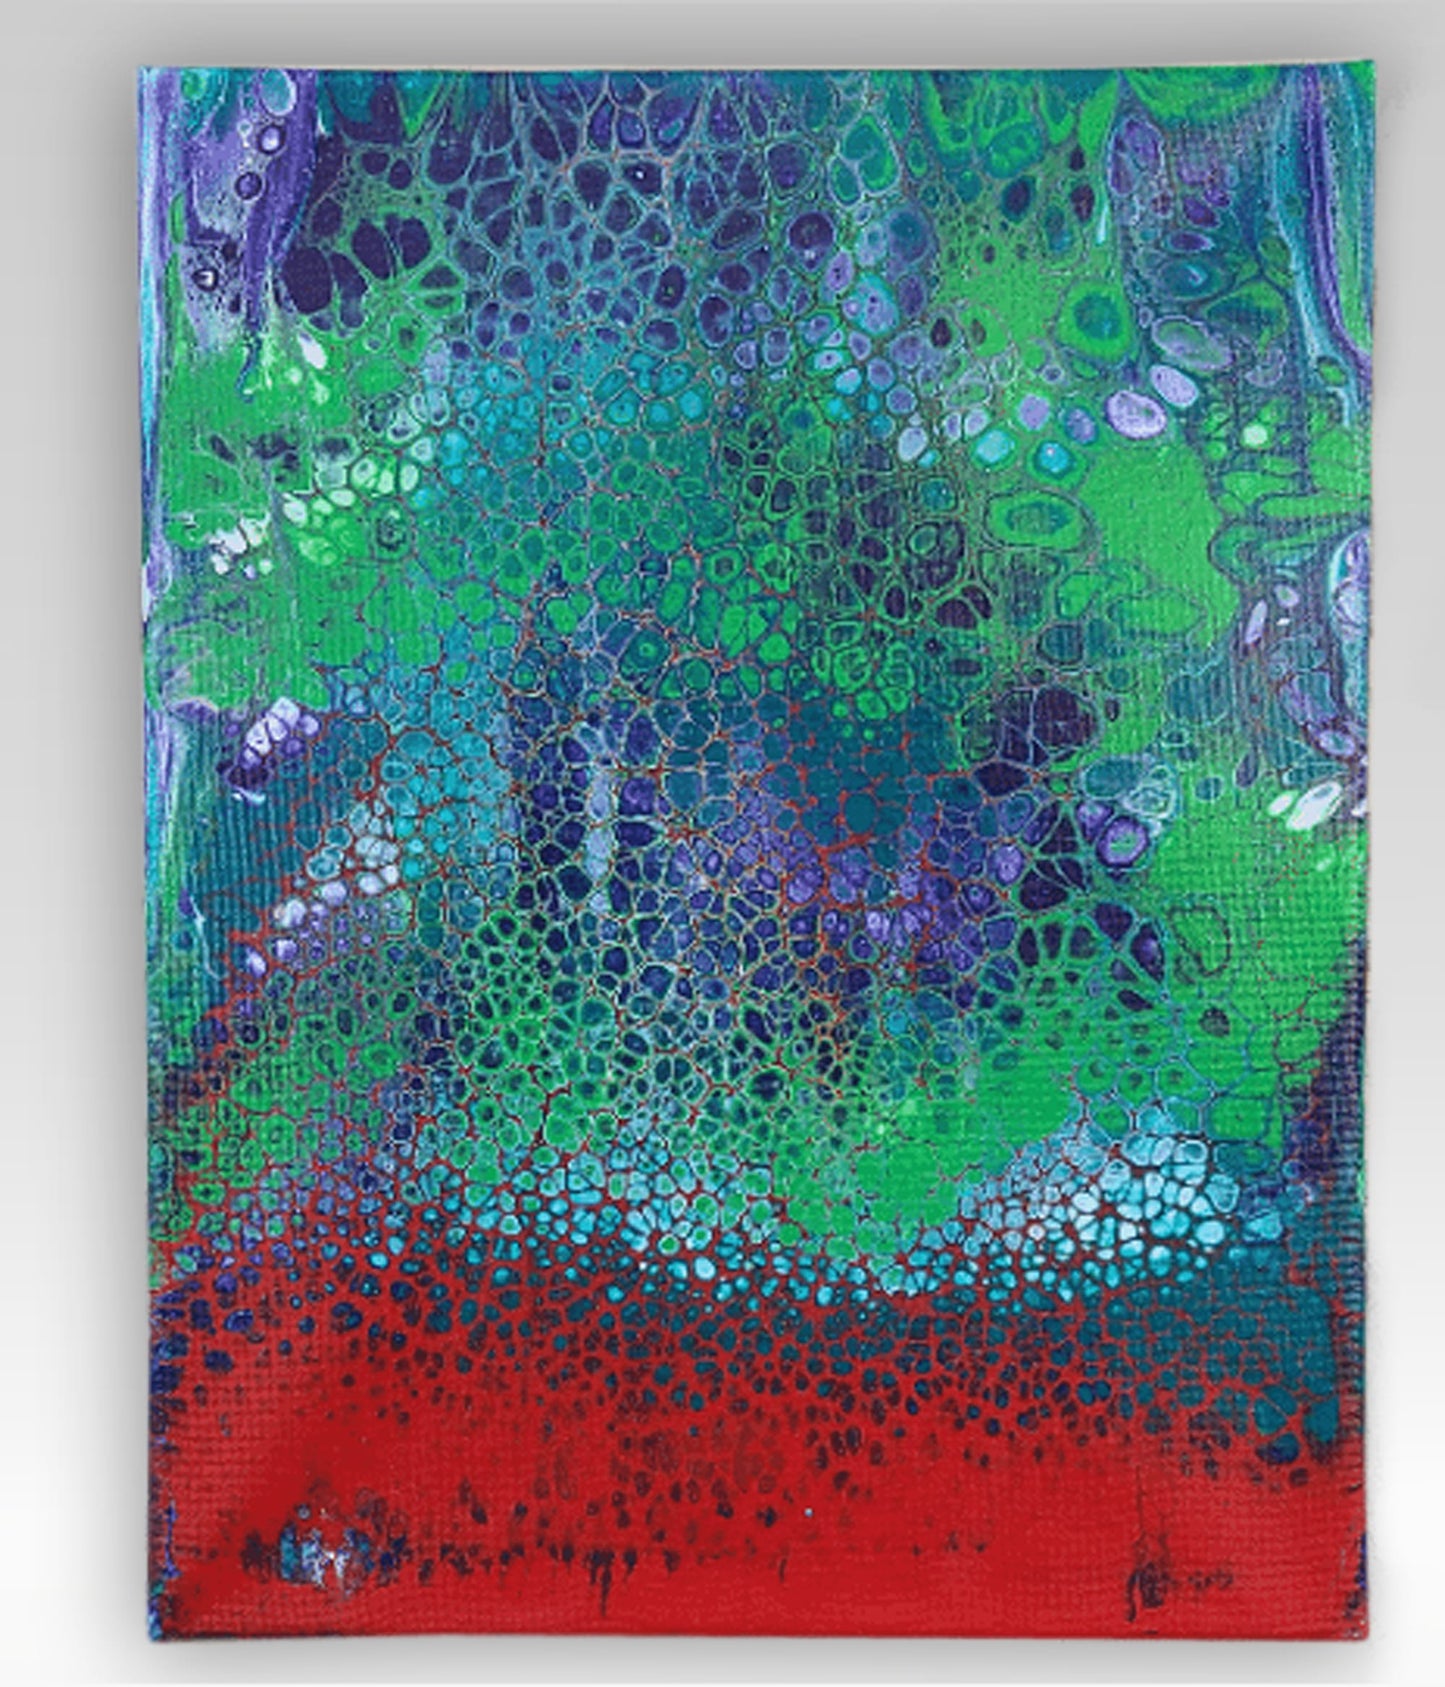 Frog DNA – 11 x 14 Acrylic Pour On Canvas